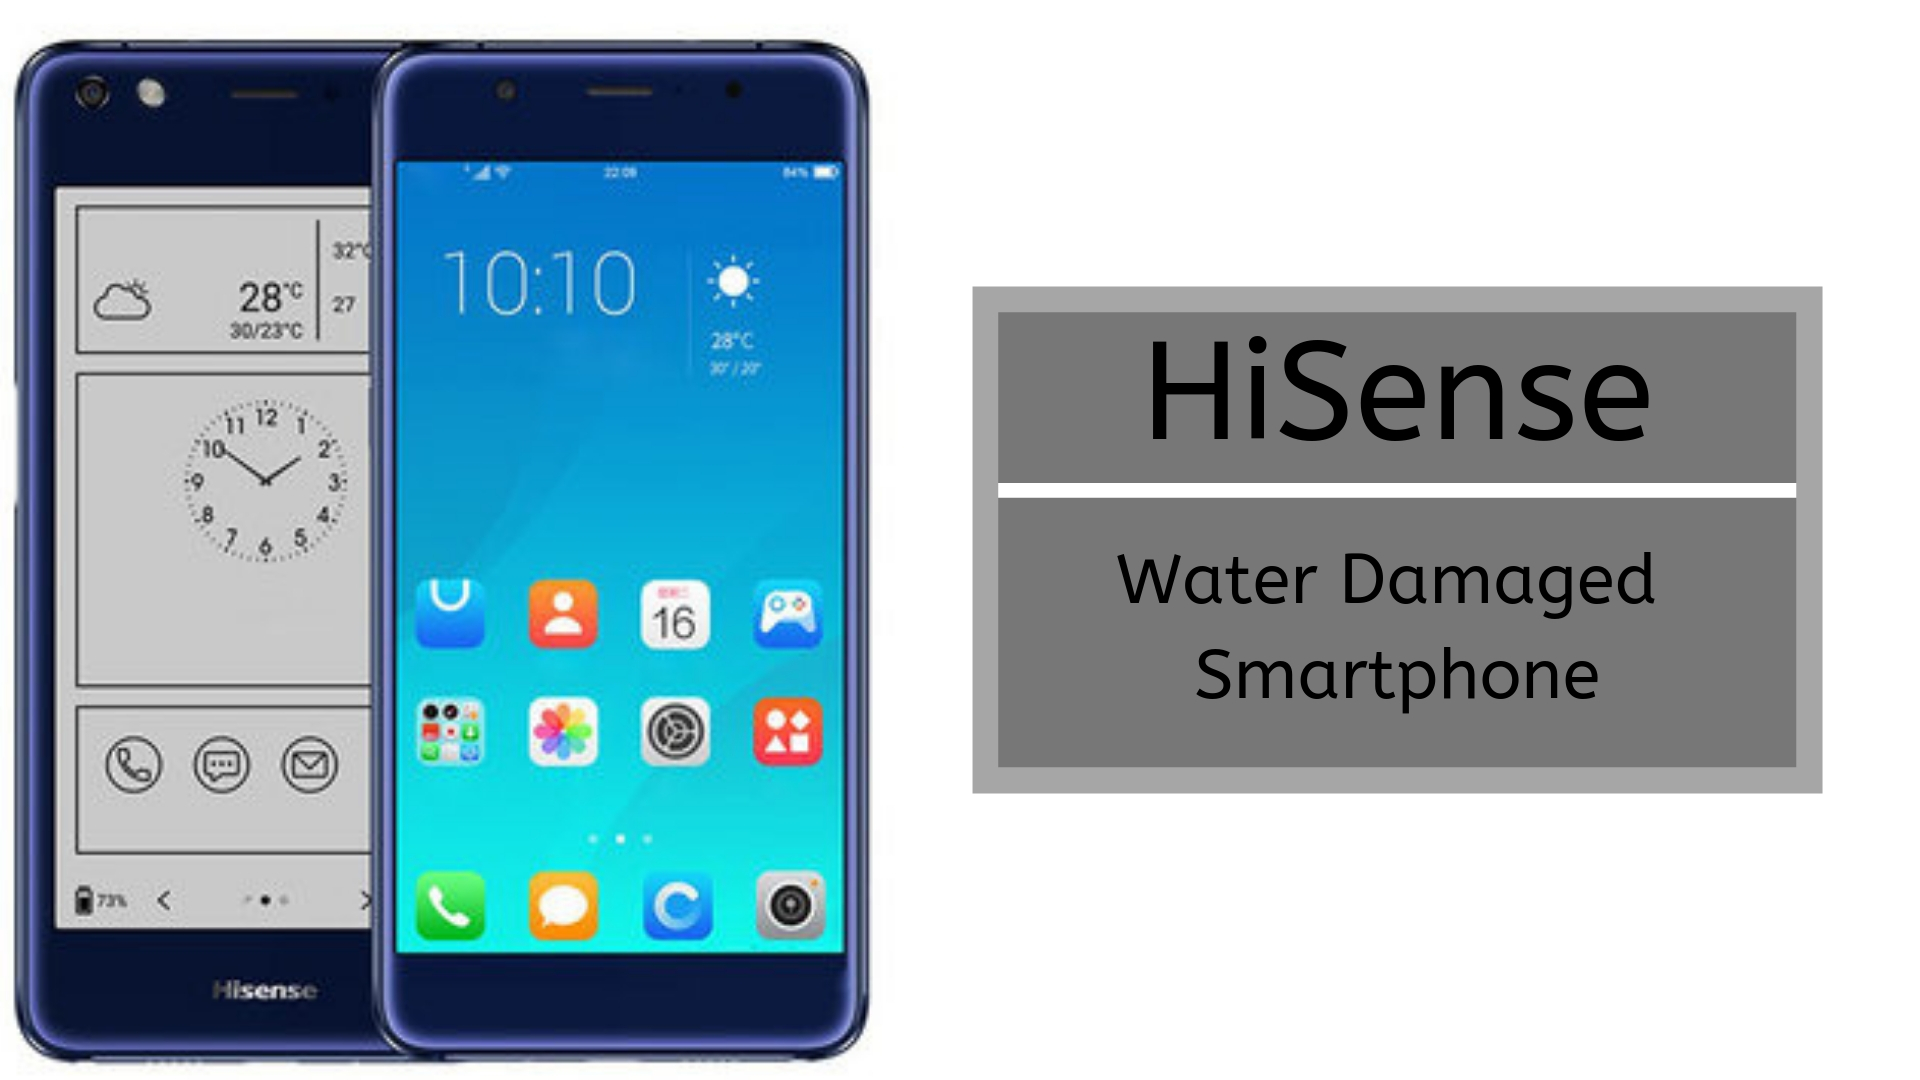 How To Fix HiSense Water Damaged Smartphone [Quick Guide]